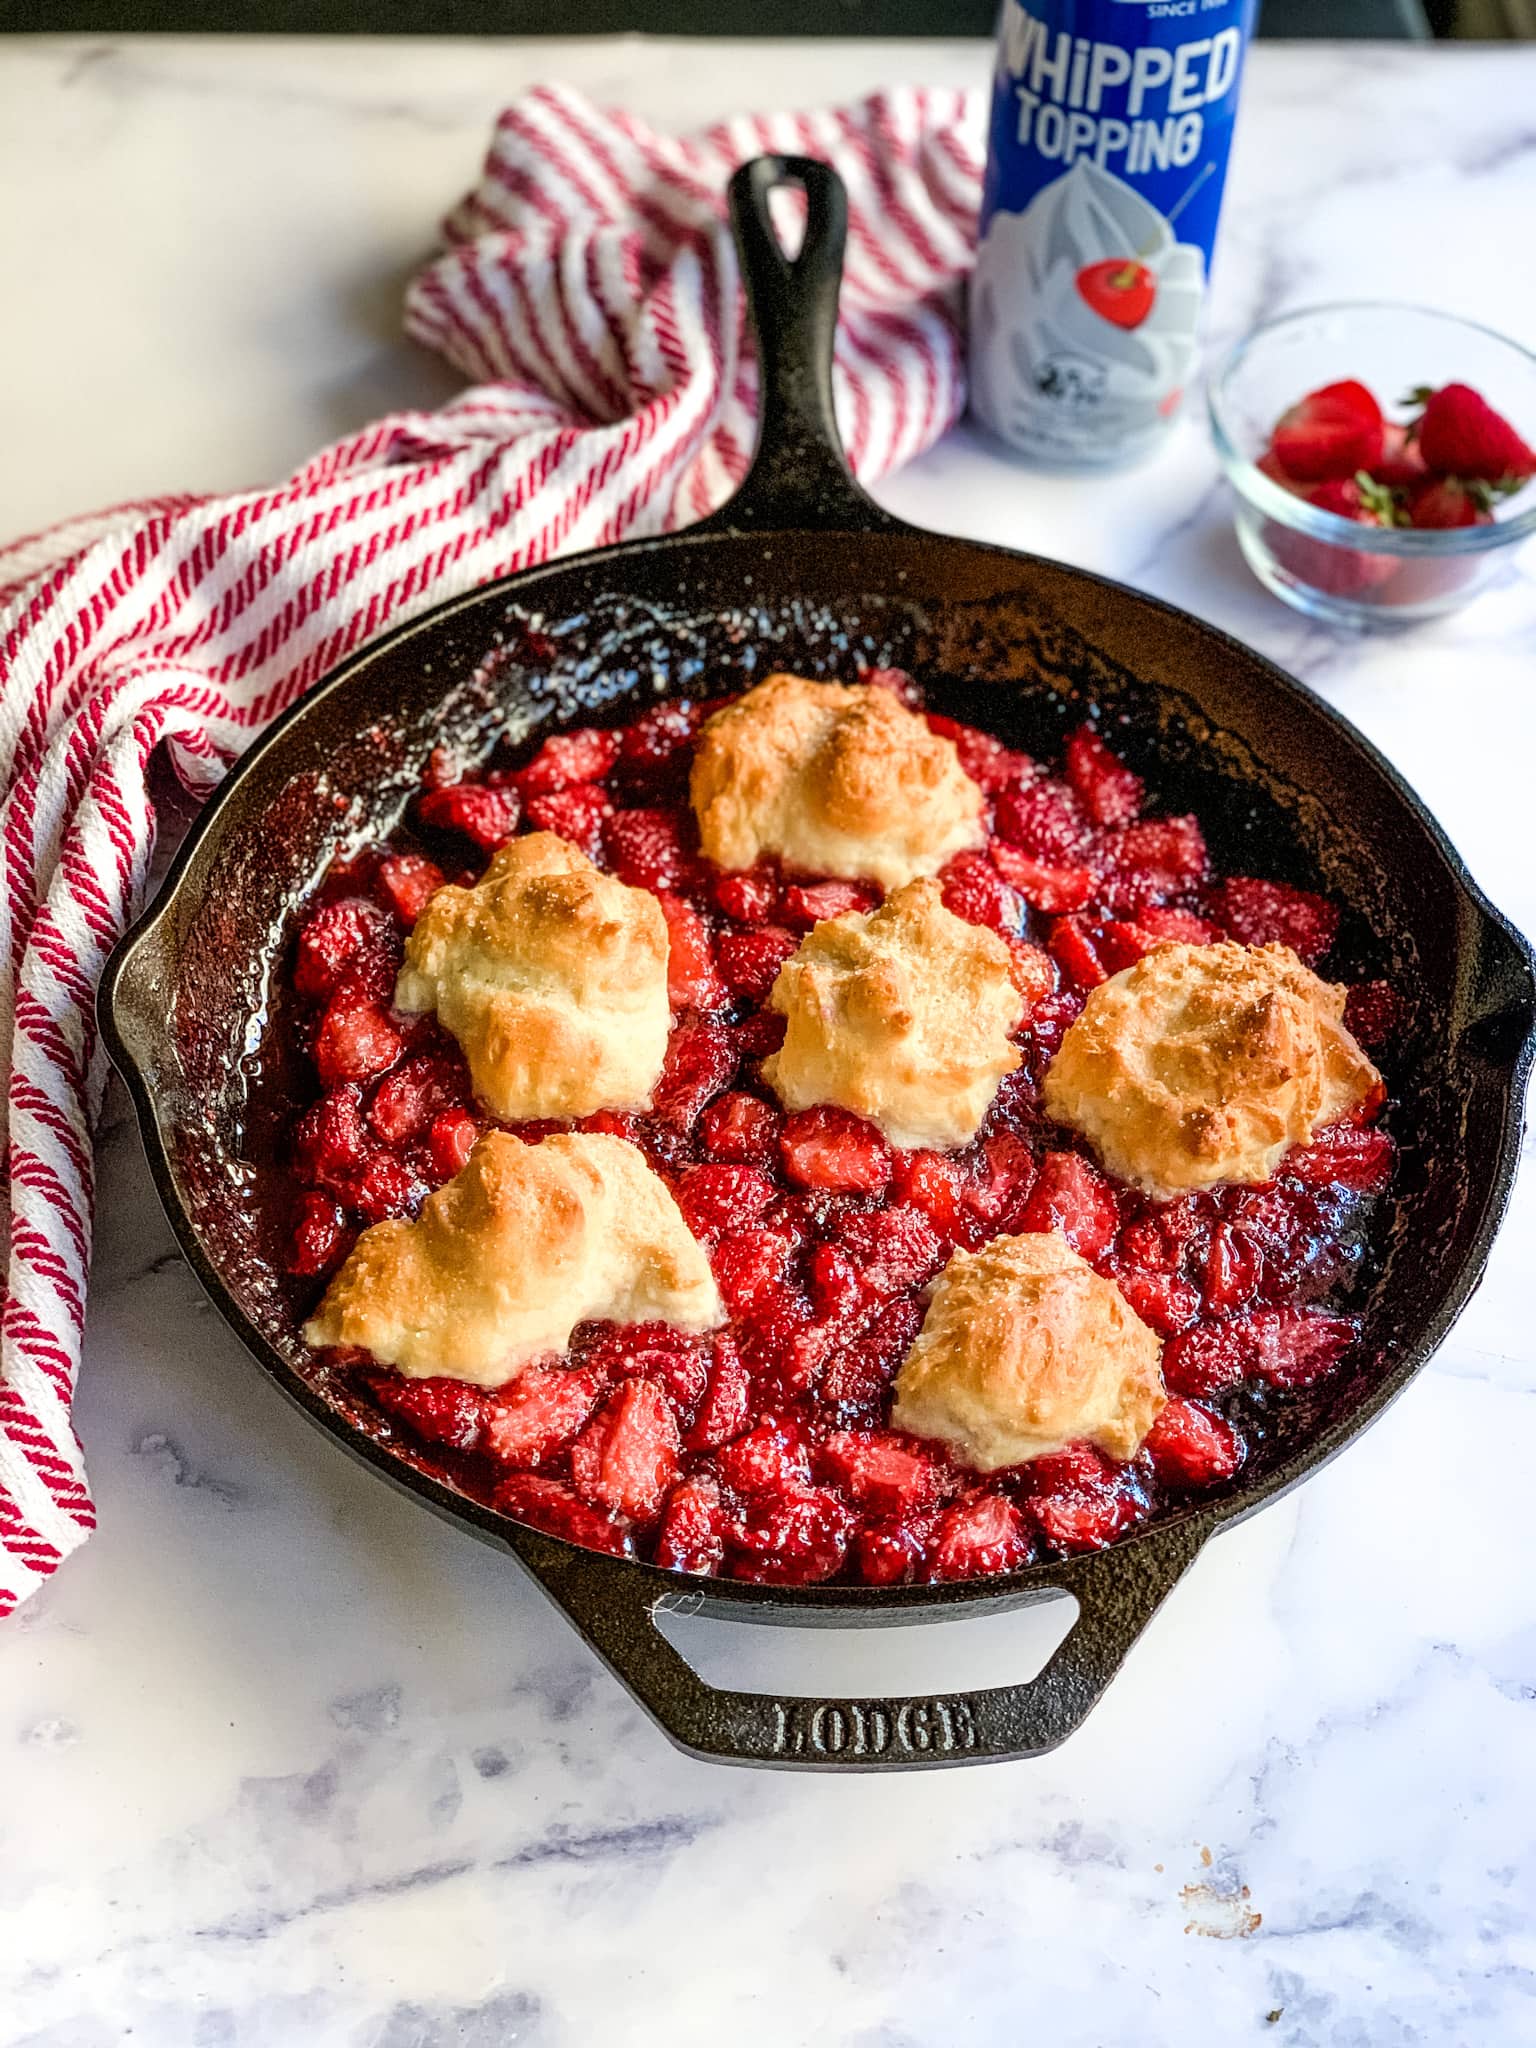 Strawberry cobbler in a cast iron skillet.